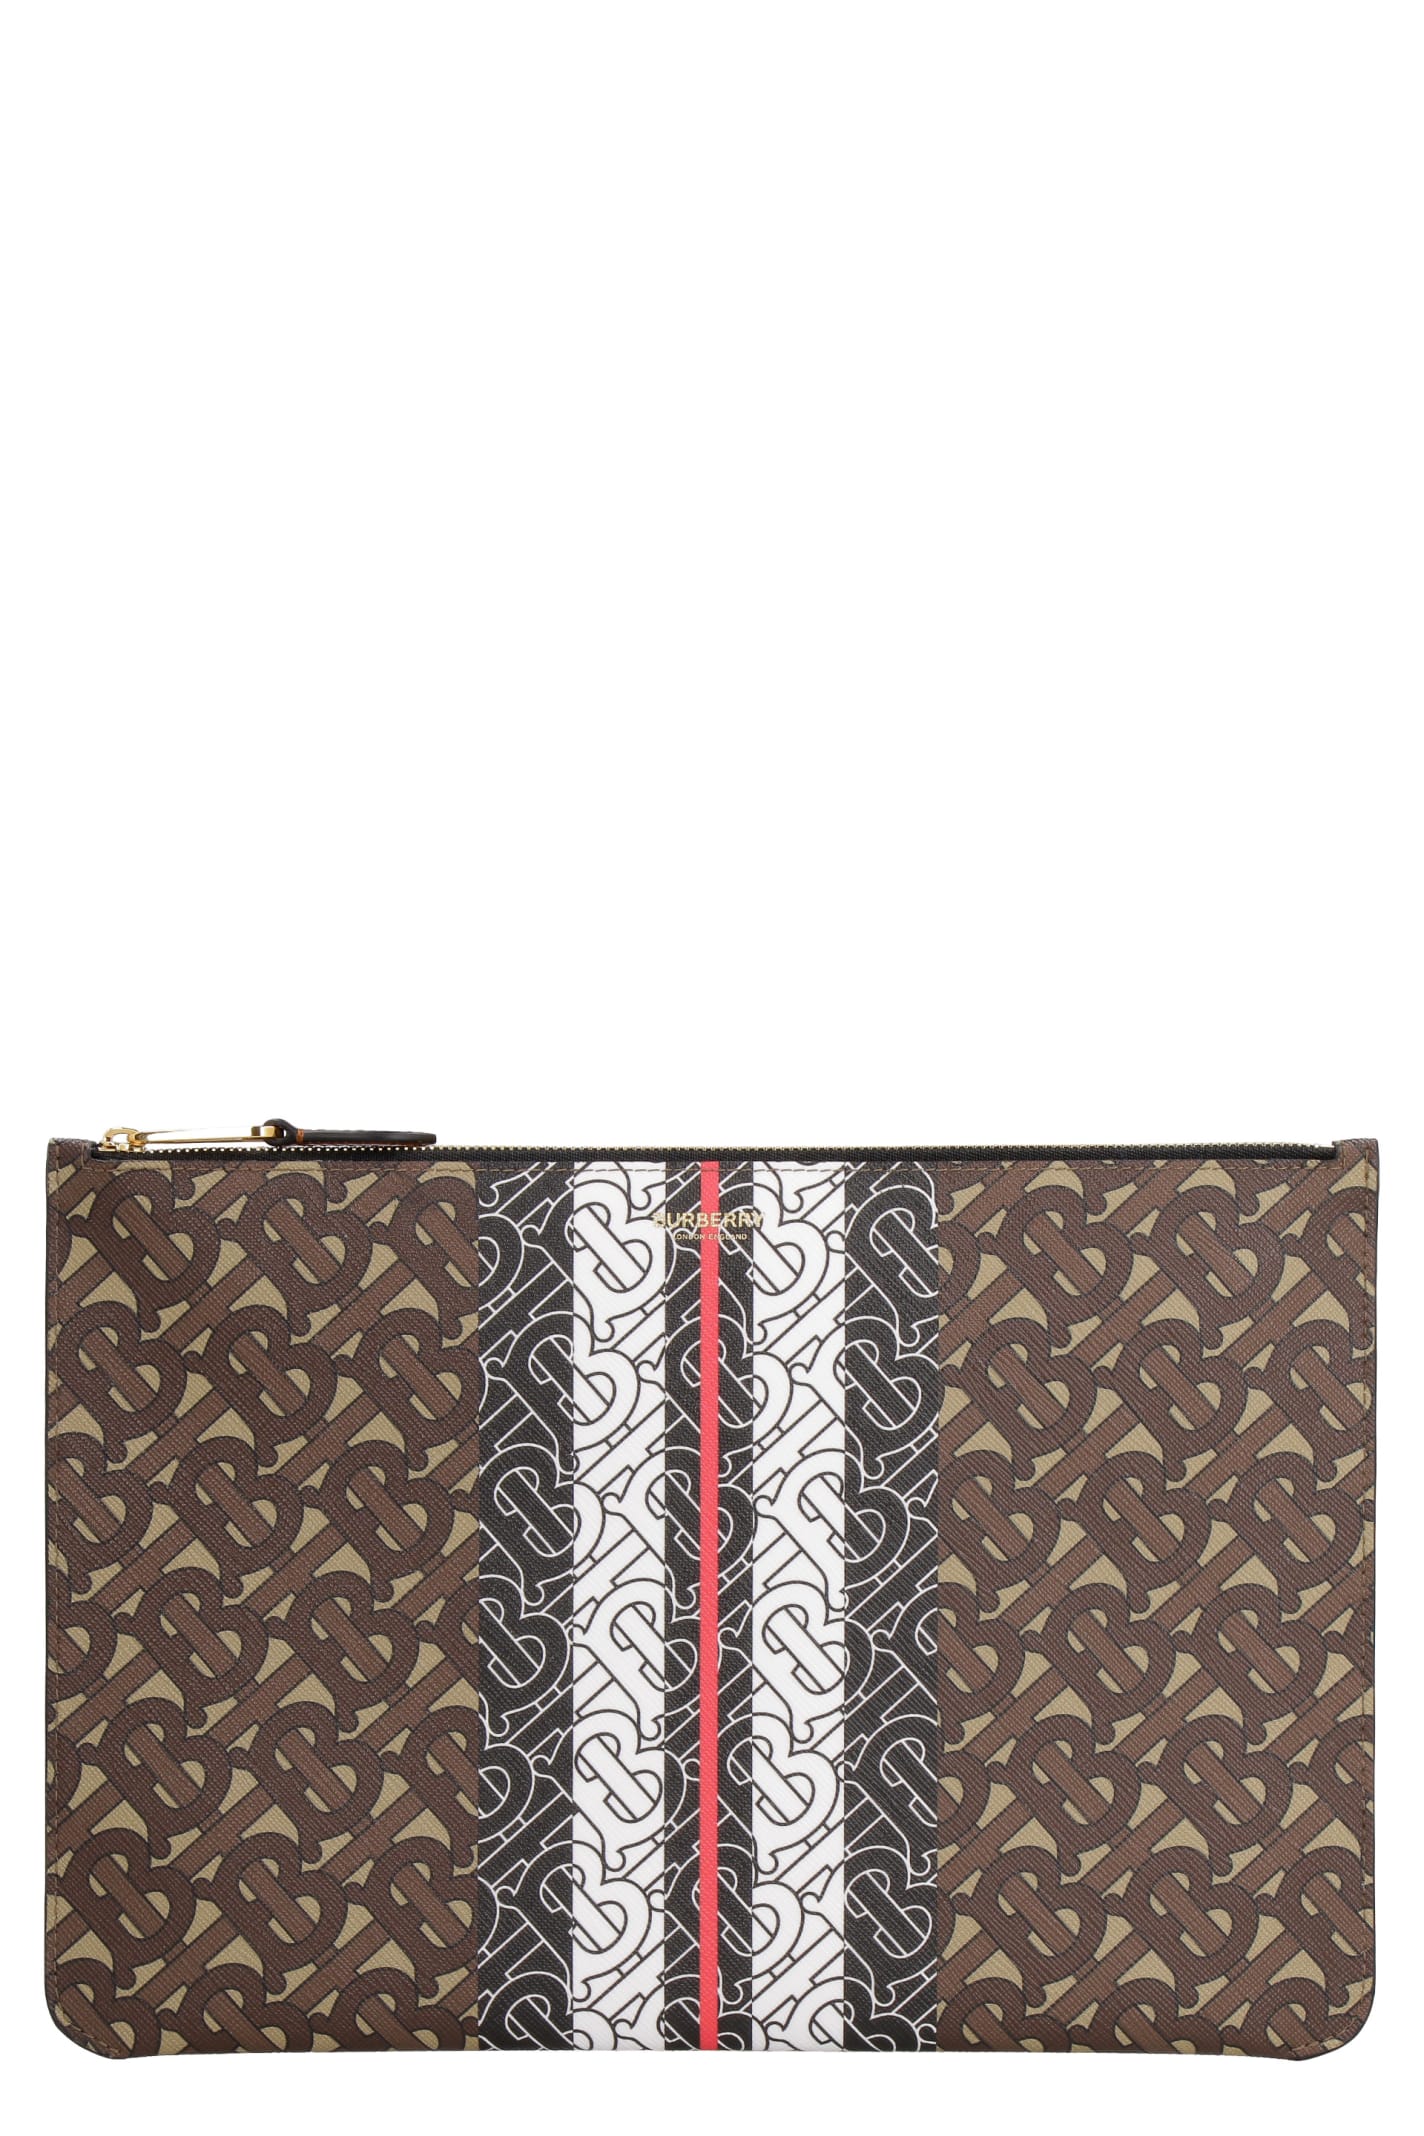 BURBERRY COATED CANVAS CLUTCH,11206367